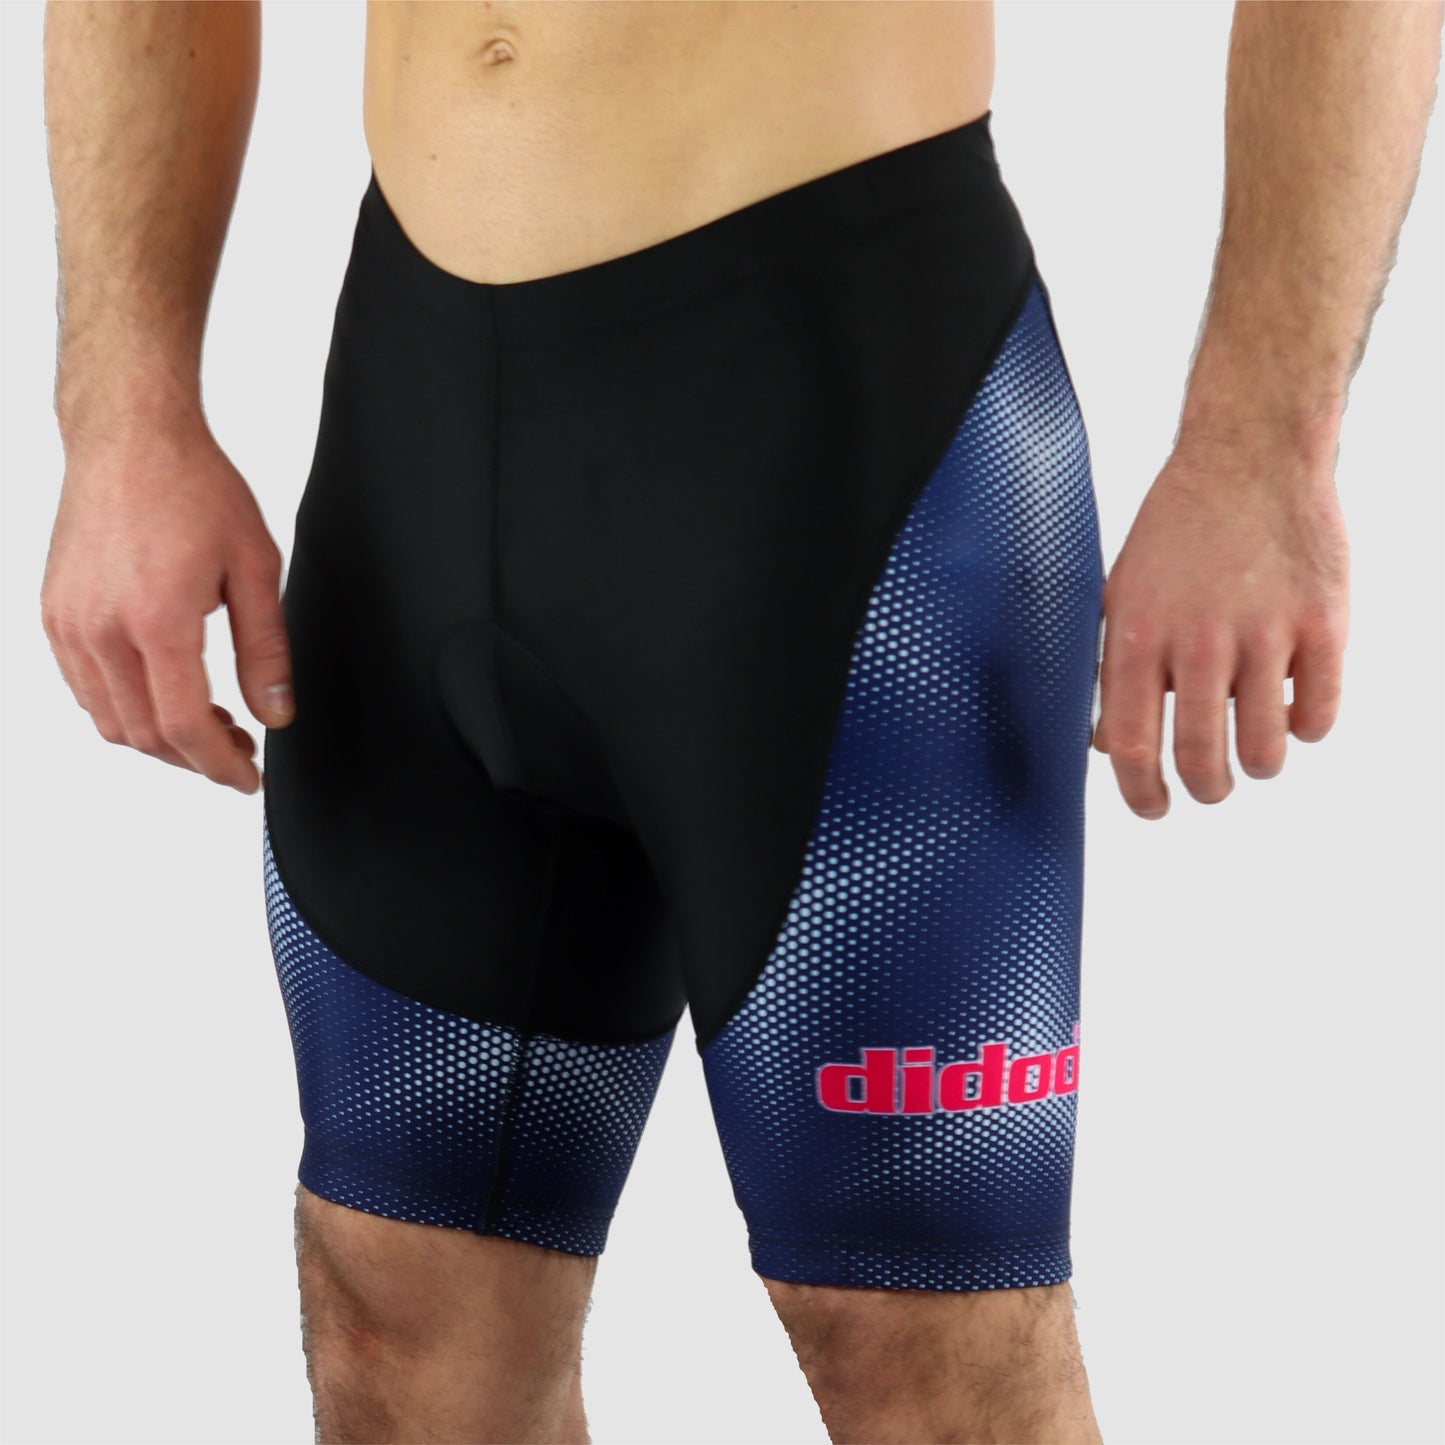 DiDOO Men's Classic Quick Dry Padded Cycling Shorts Black and Navy Blue